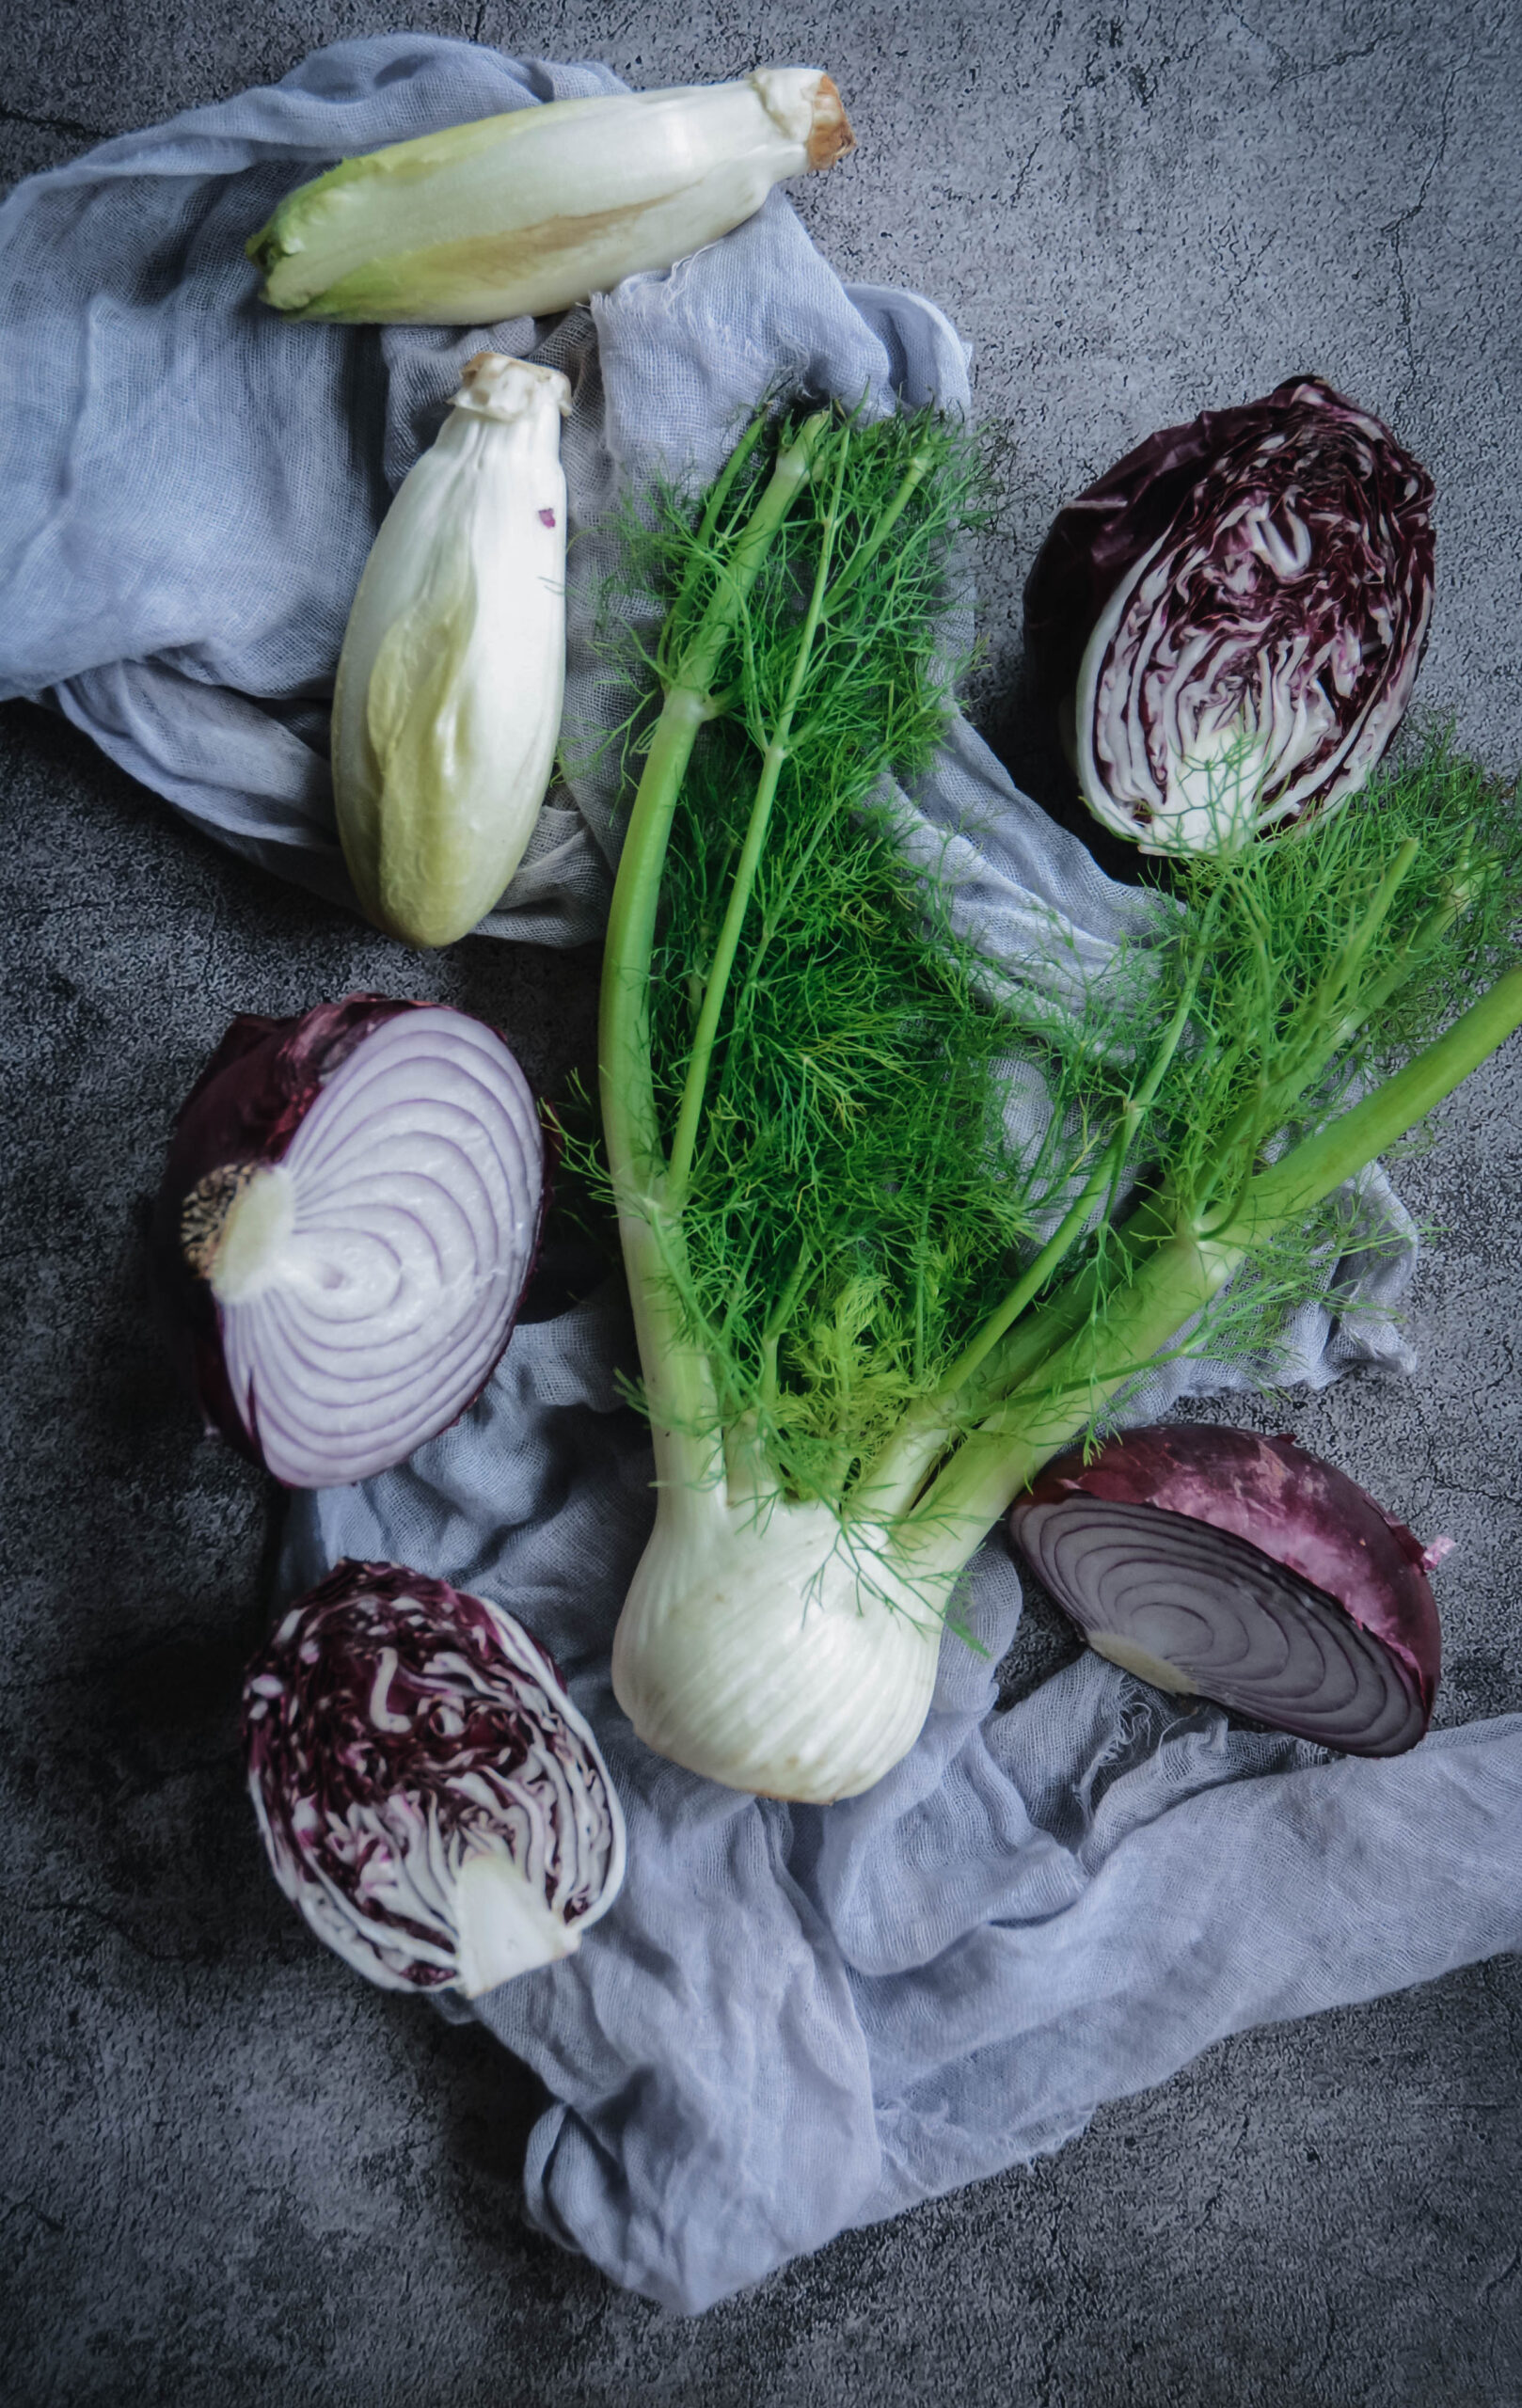 red onion, red lettuce, fennel on a napkin